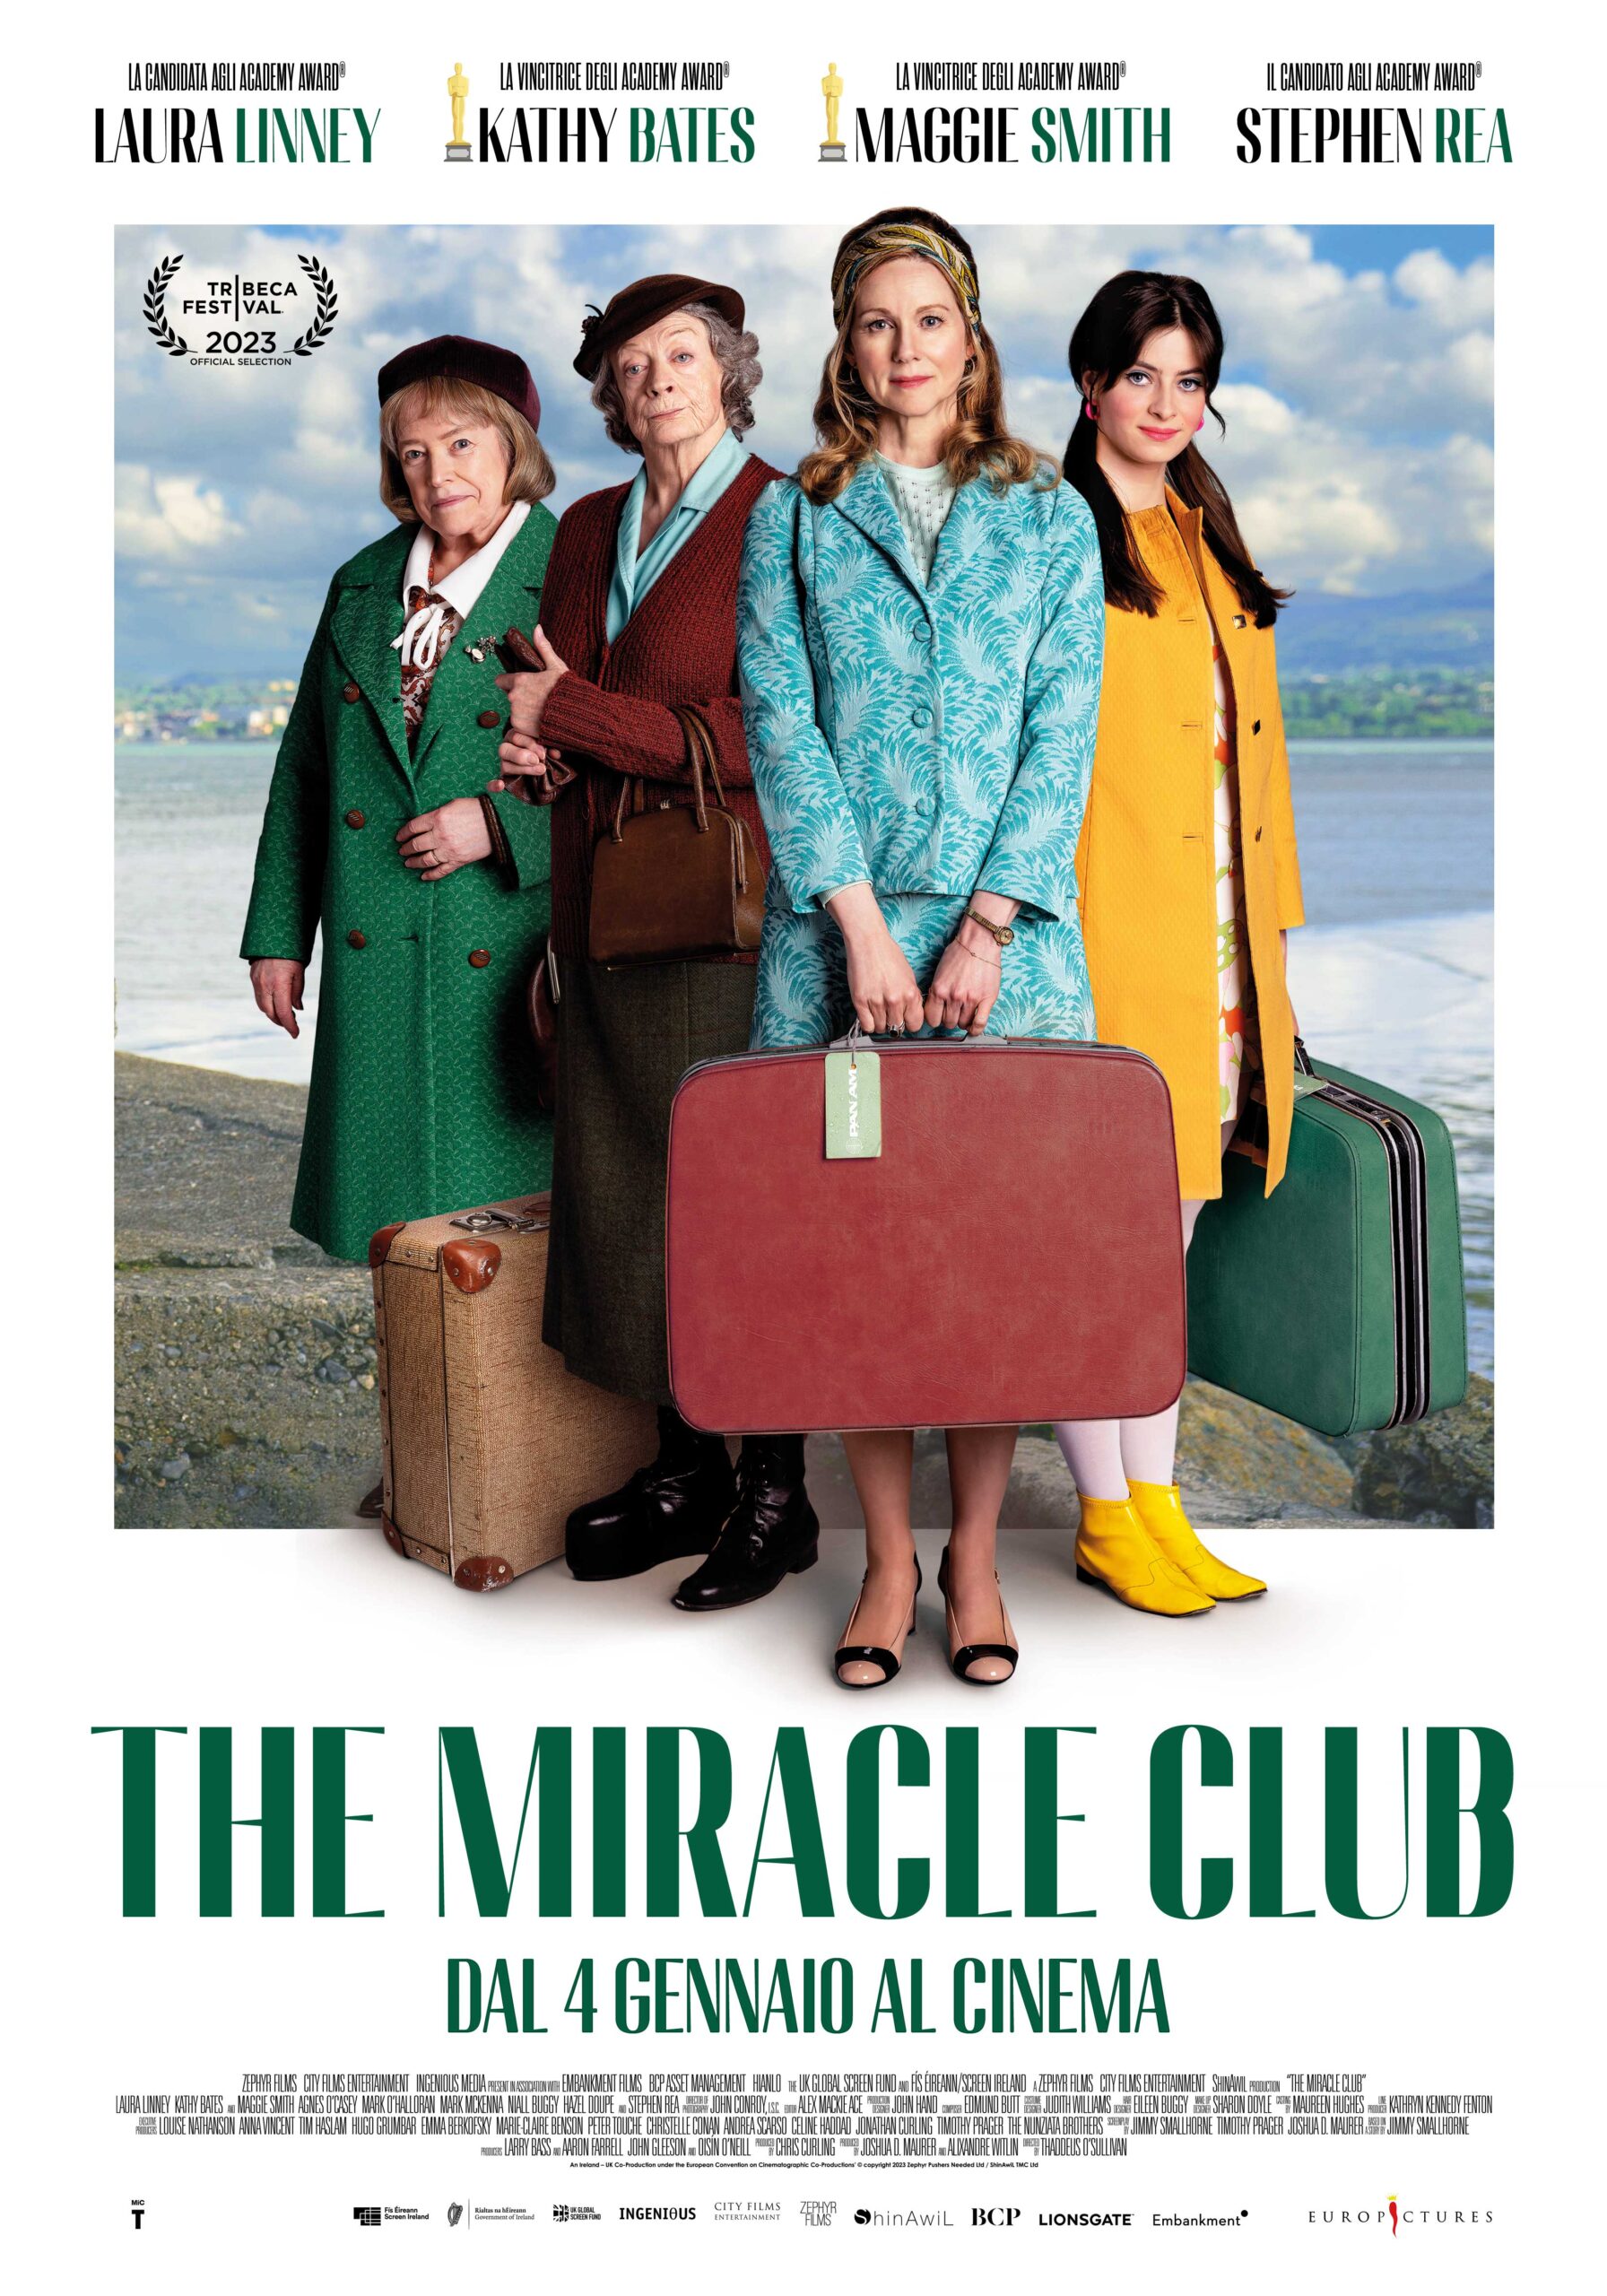 The Miracle in sala dal 4 gennaio, il film con Maggie Smith, Kathy Bates, Laura Linney